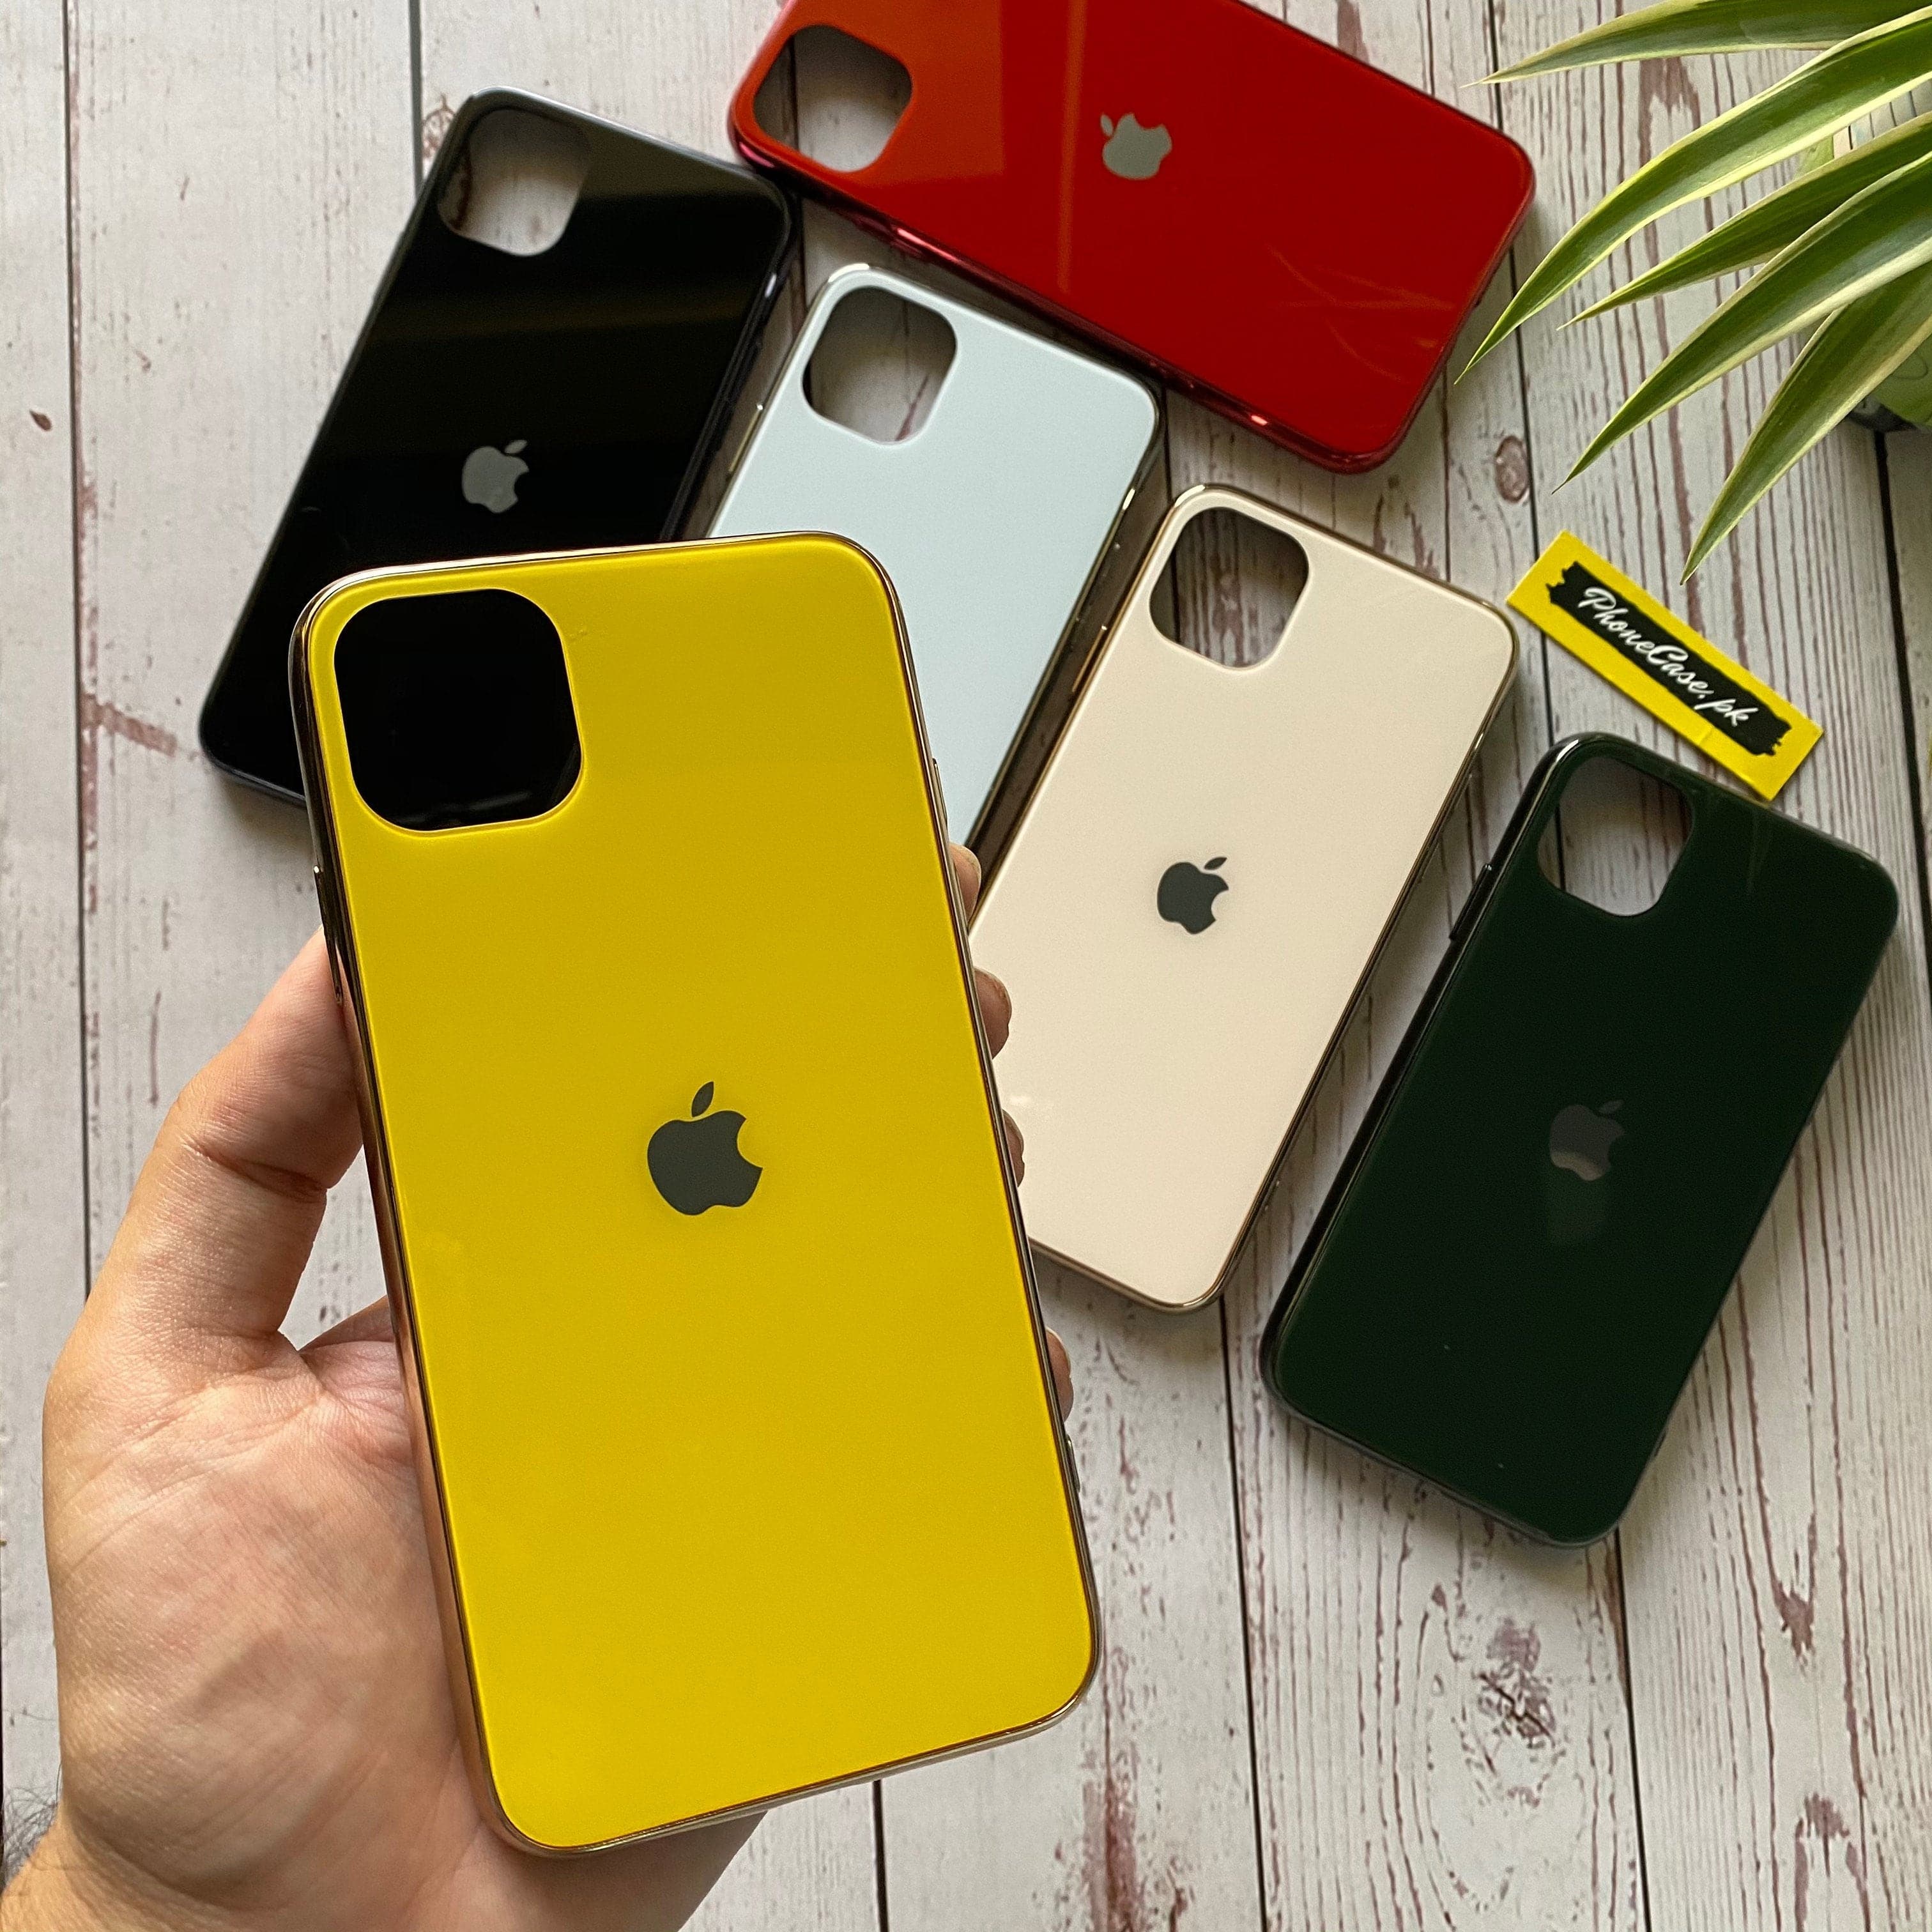 iPhone 11 Series Premium Glass Back Tempered Glass Case with logo